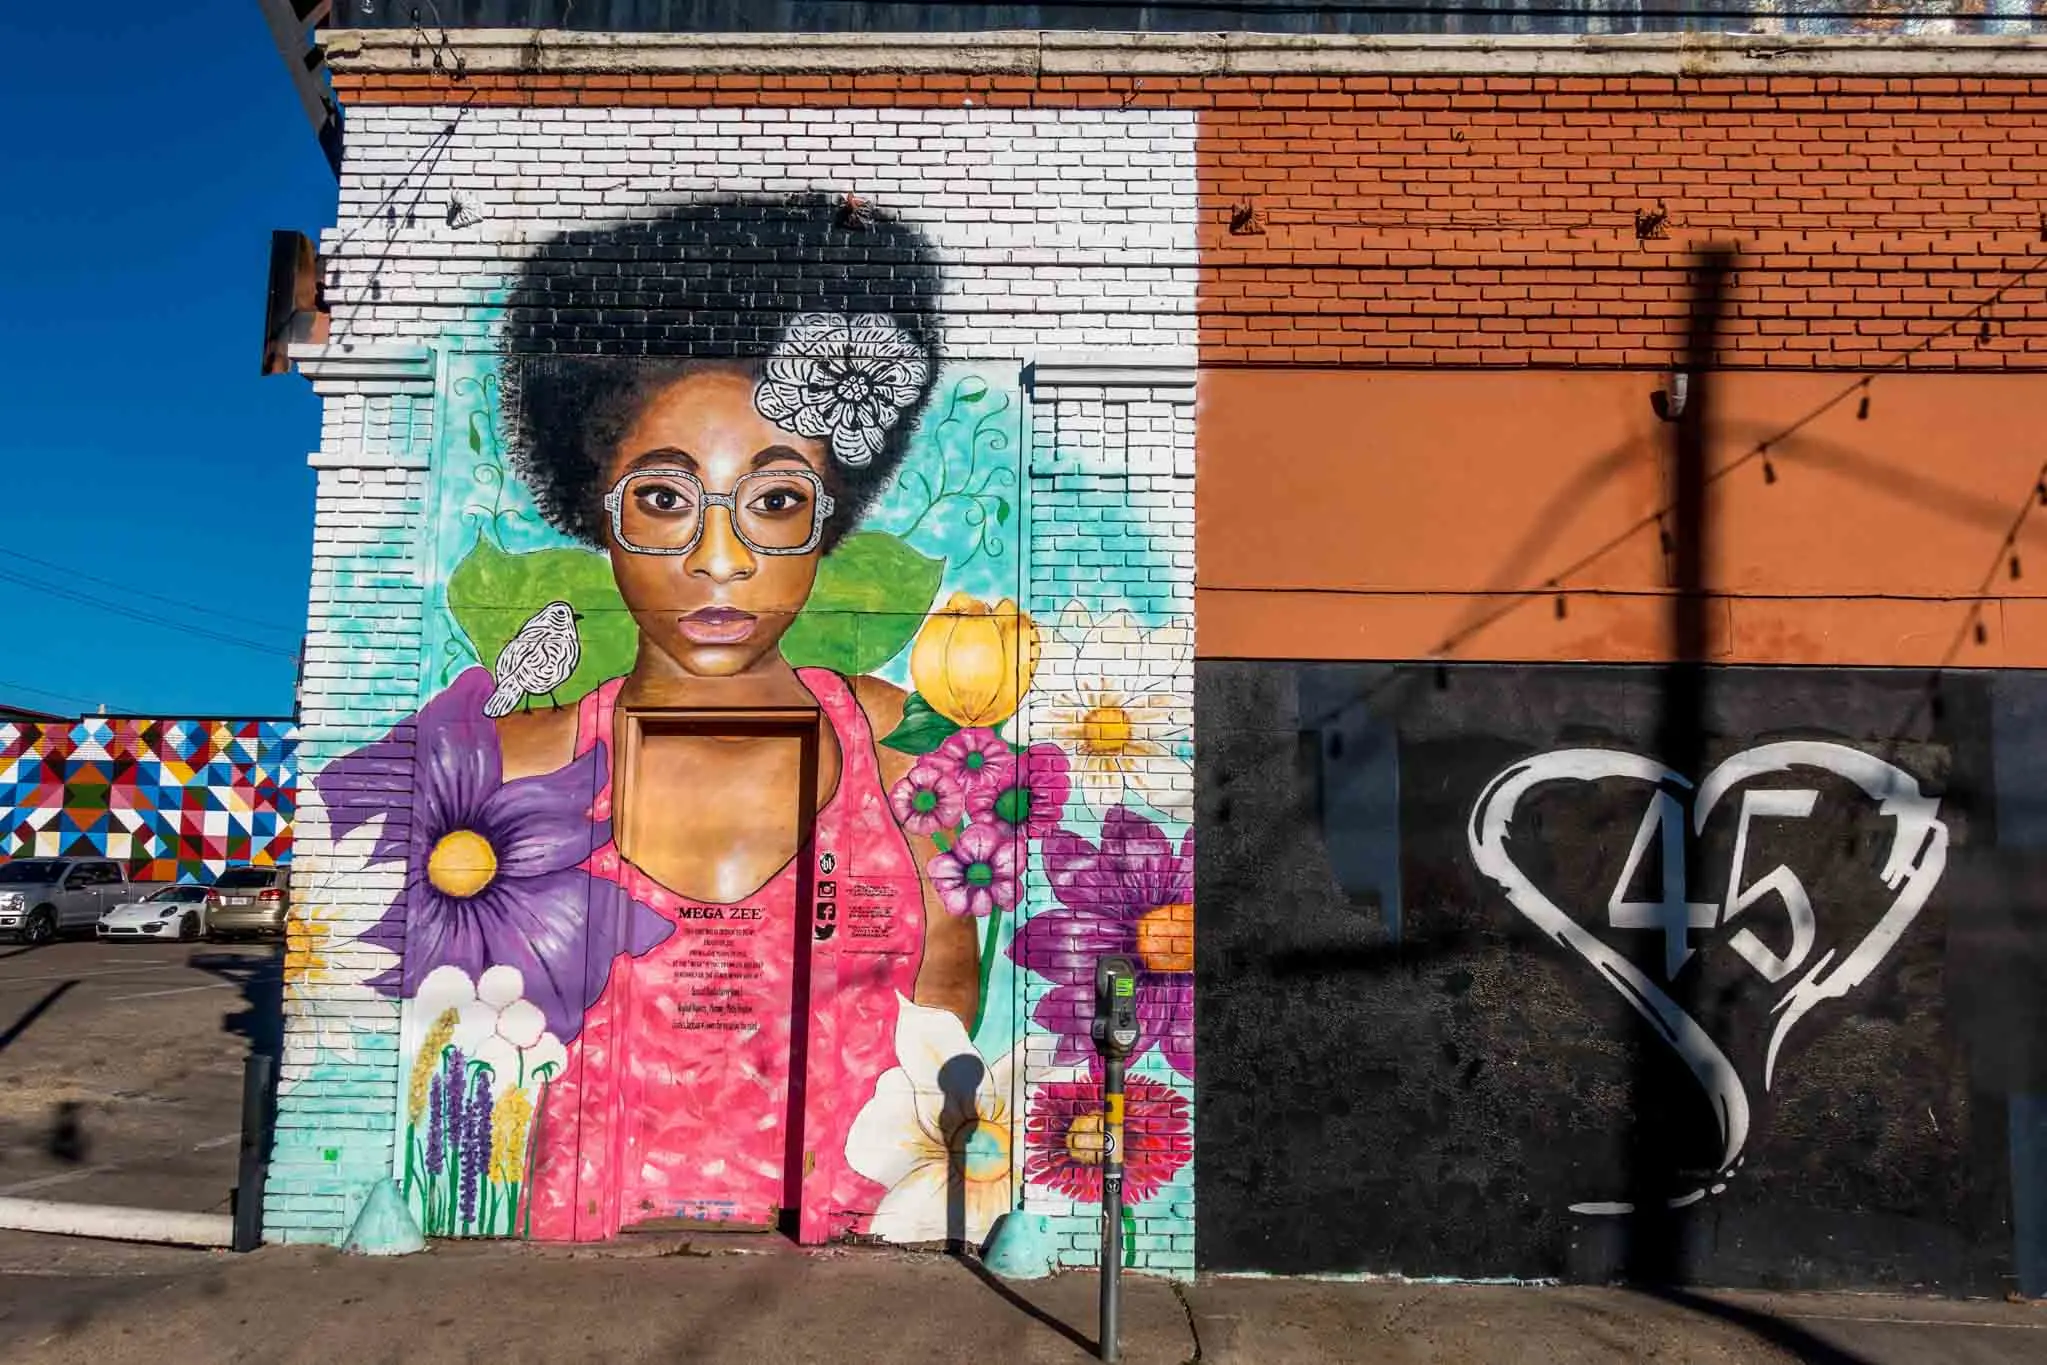 Street art showing a woman with bright flowers